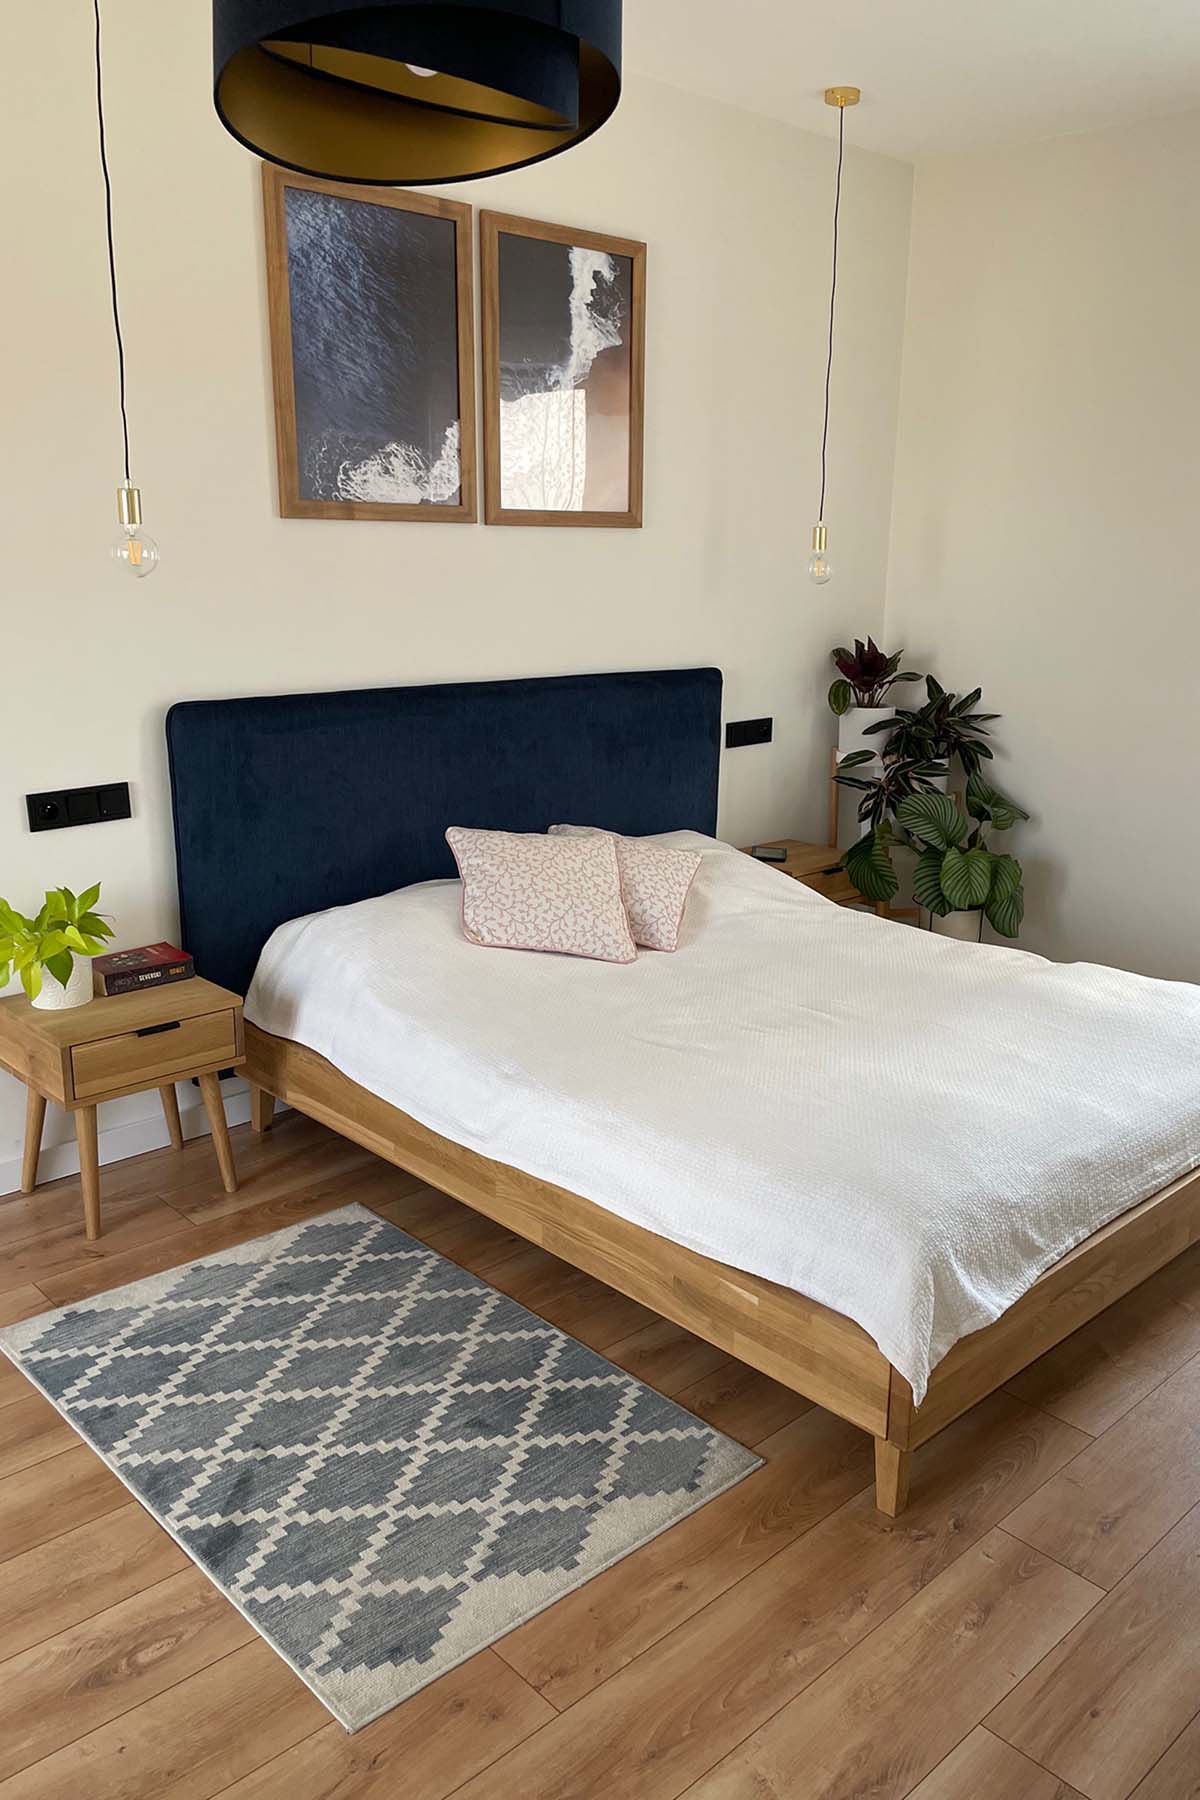 Navy blue bedroom - what furniture will suit